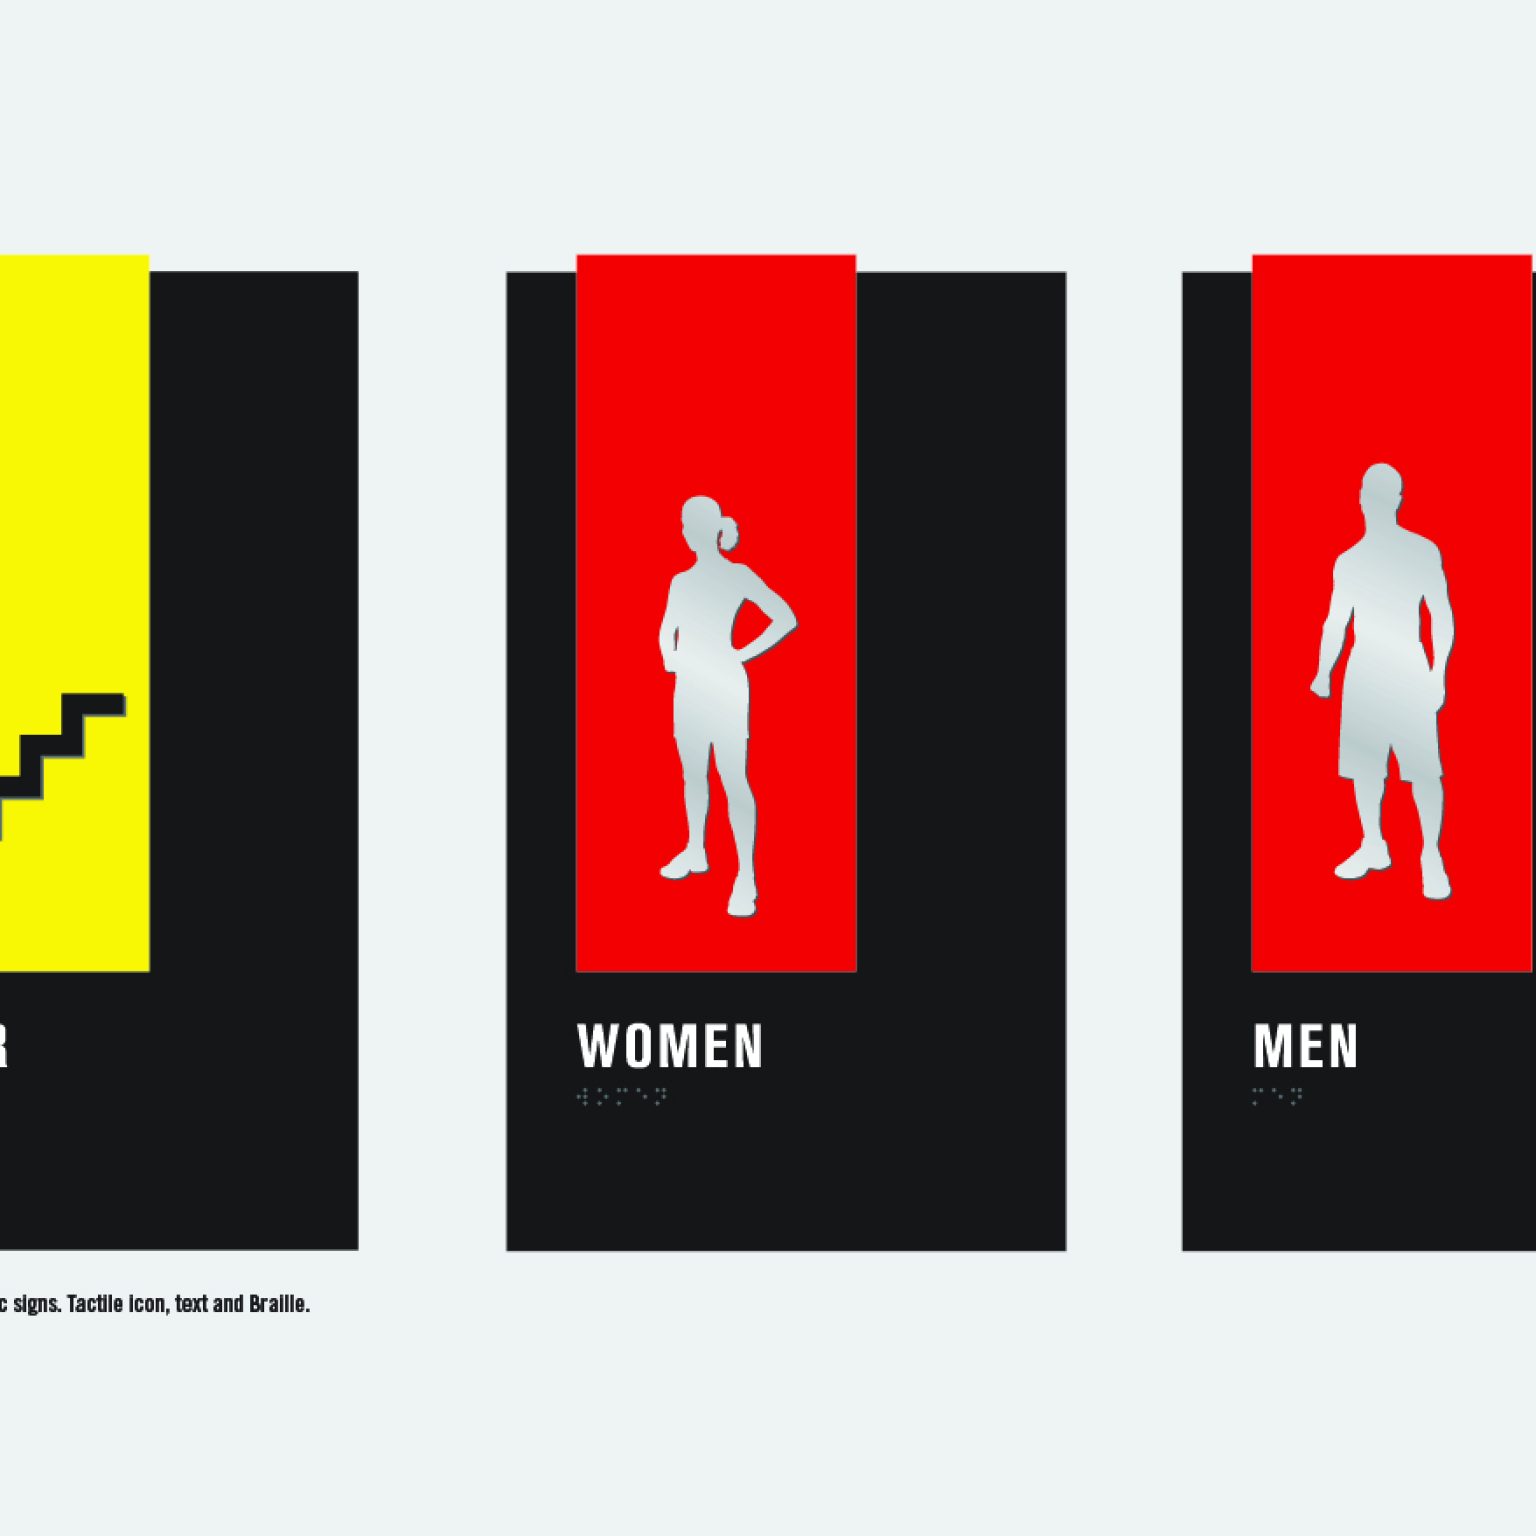 Wayfinding signs for UnderArmour